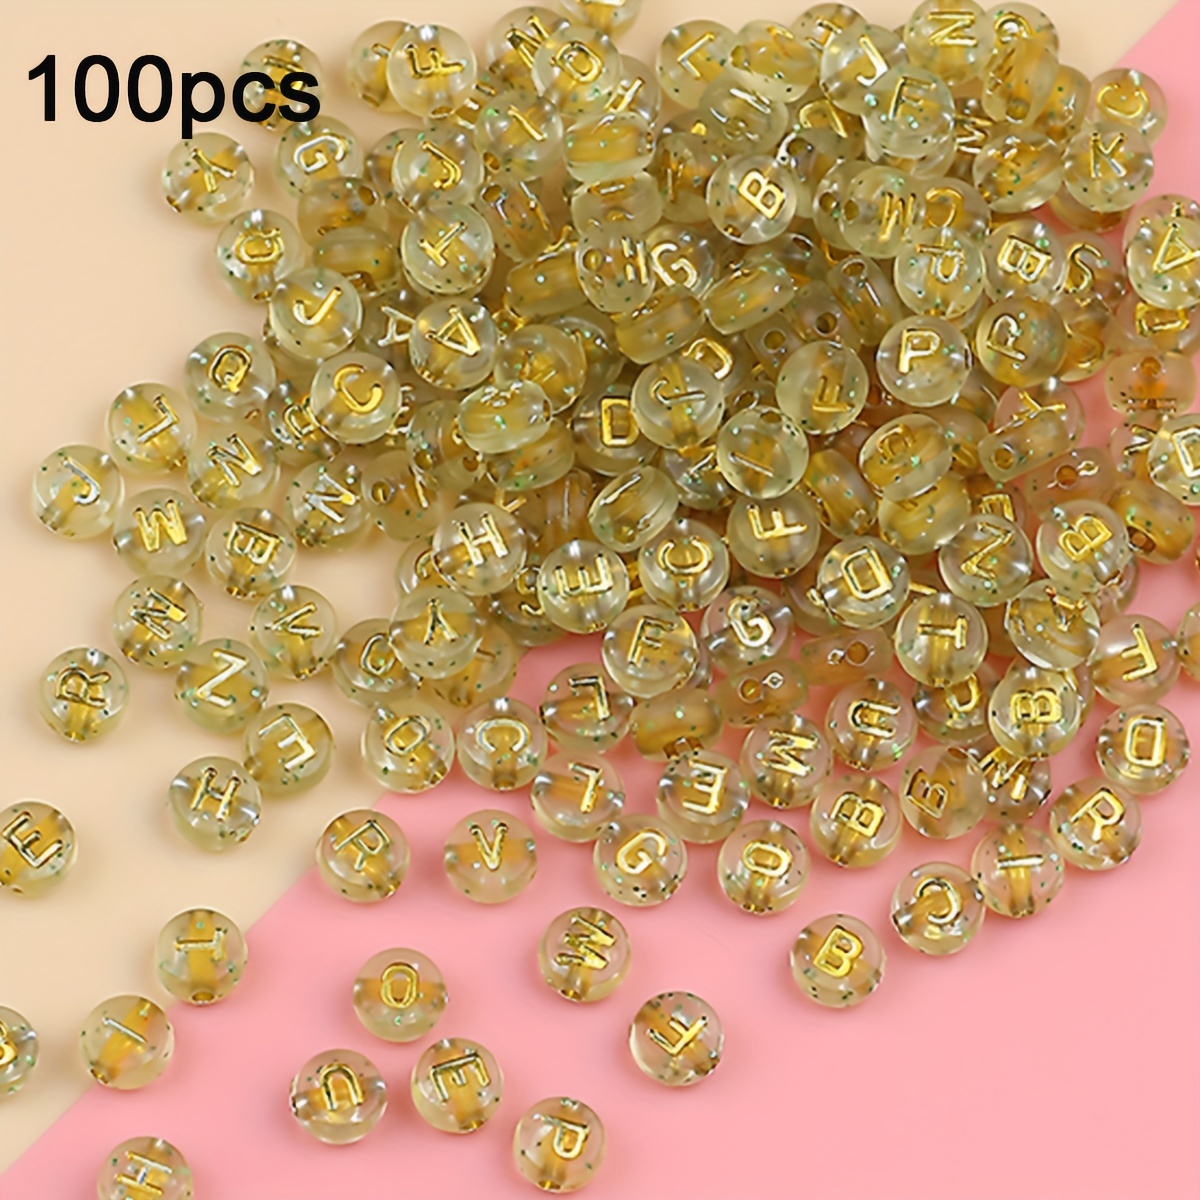 WangLaap 750Pcs Number Heart Beads Acrylic 4x7mm Round Beads for Bracelets  Neckless Friendship Jewelry DIY Making (15Grids)